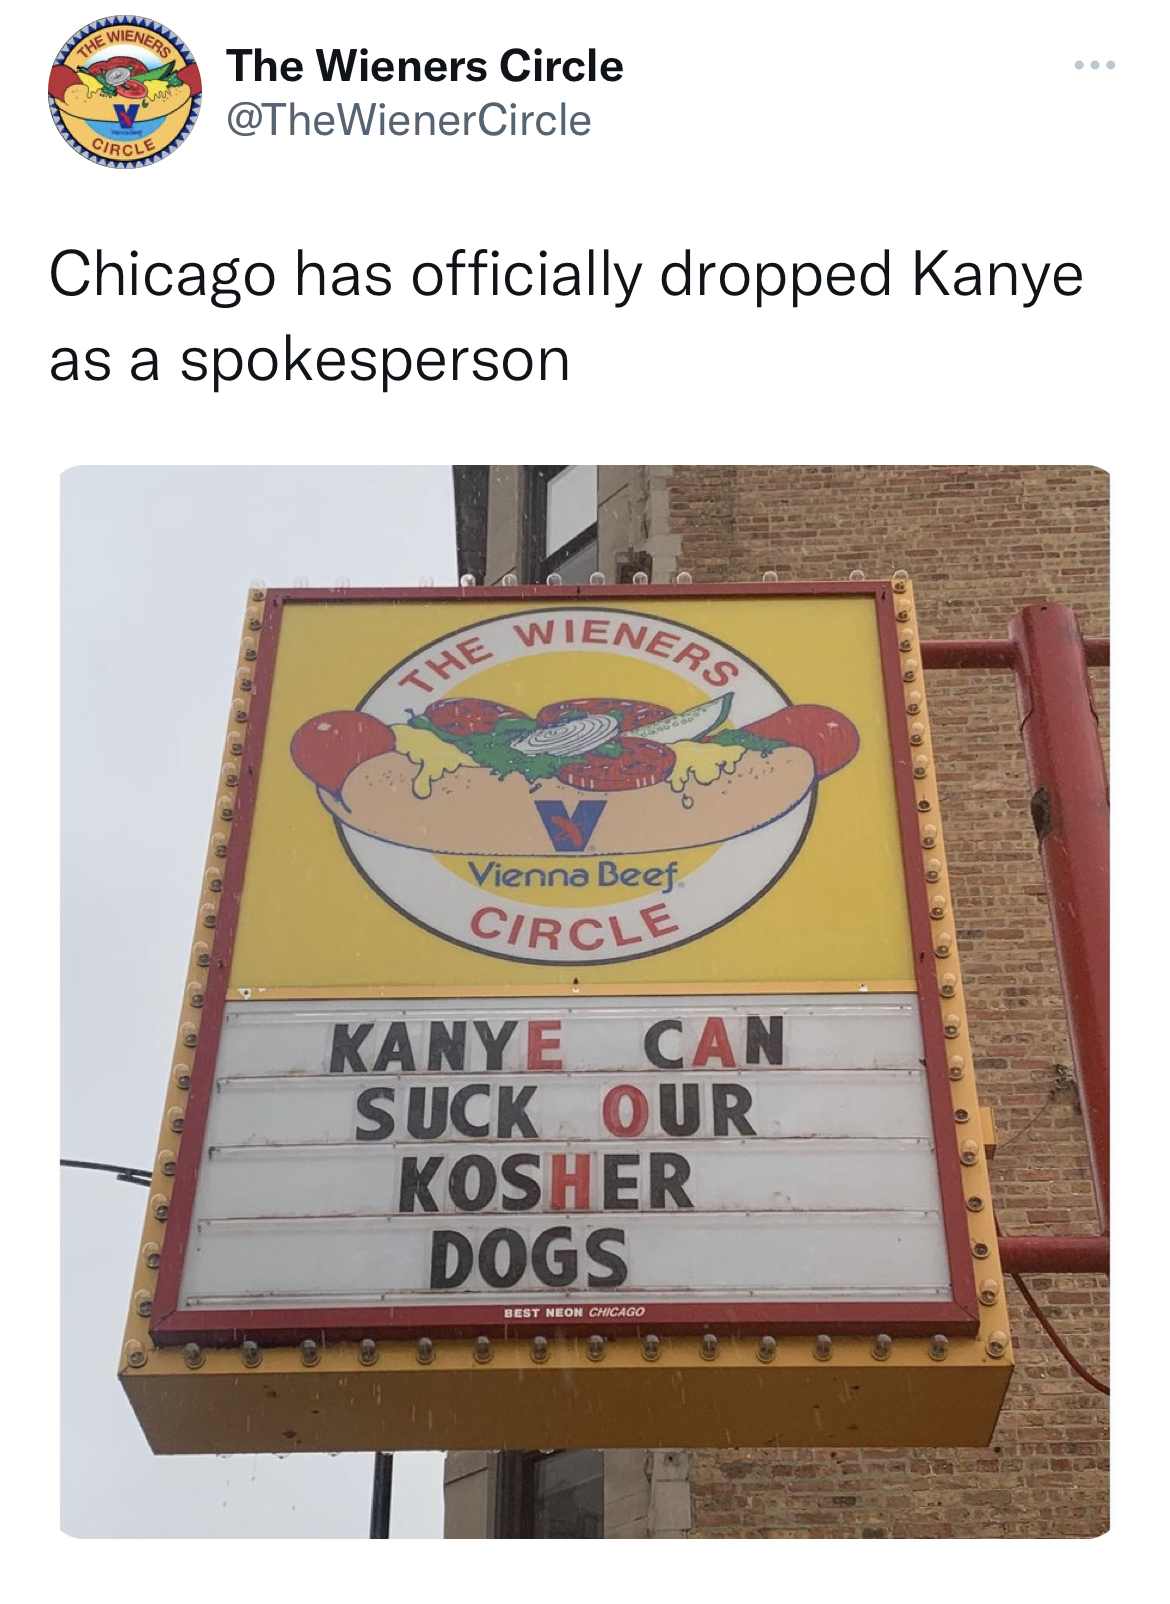 celeb roasts of the week - the wiener's circle - The Wieners Circle Chicago has officially dropped Kanye as a spokesperson The Wieners Vienna Beef Circle Kanye Can Suck Our Kosher Dogs